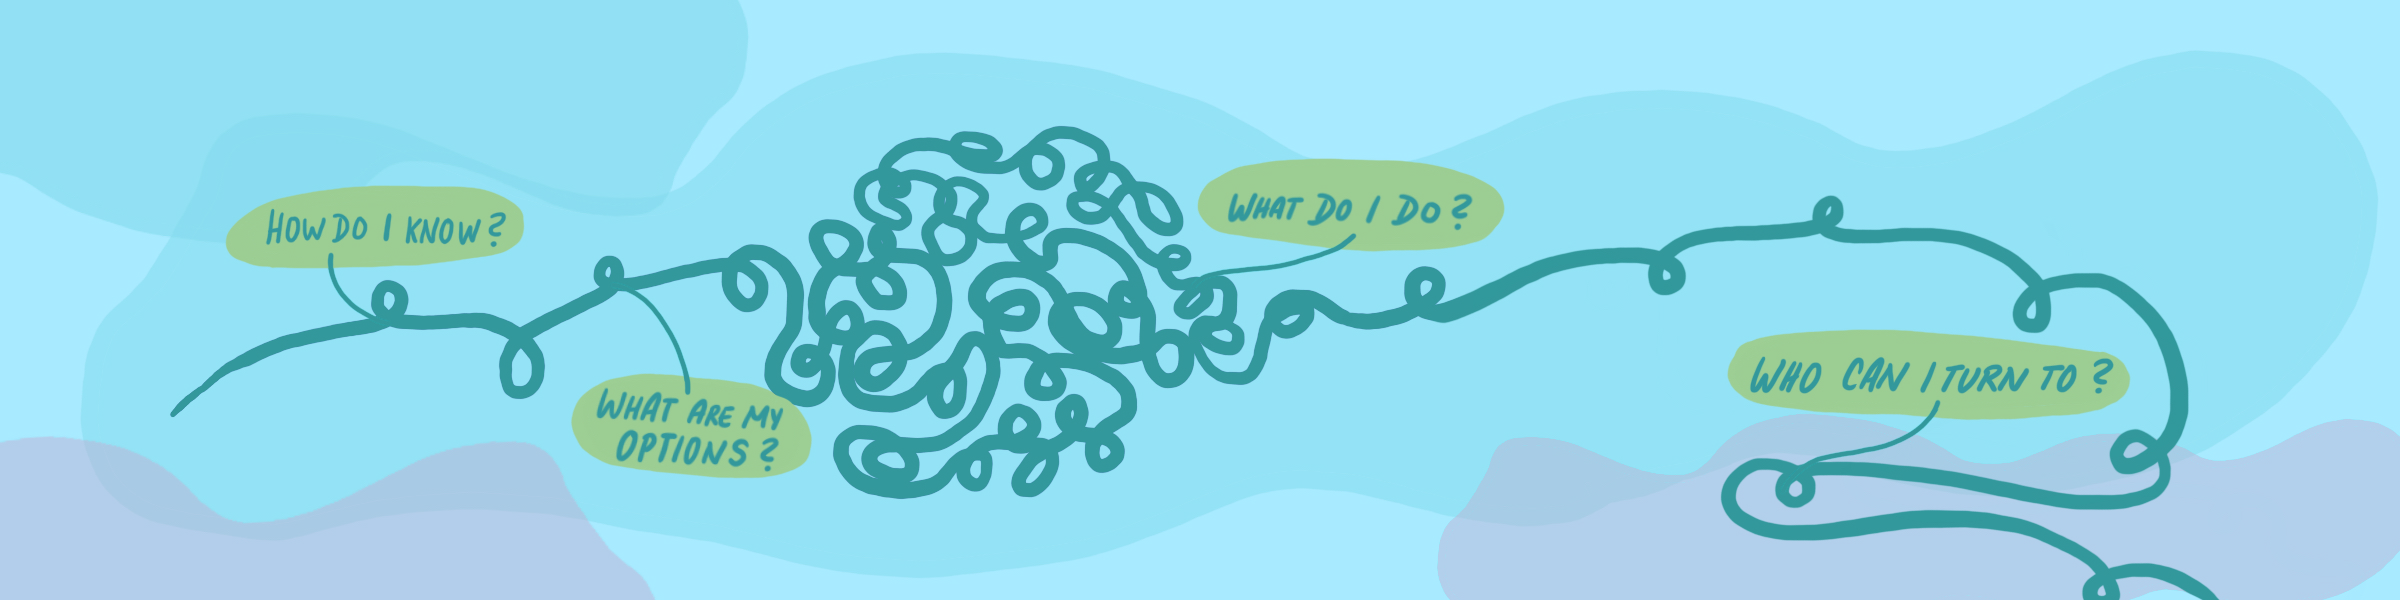 Illustrated infographic of a tangled and squiggly line that reads, “How do I know? - What are my options? - What do I do? - Who can I turn to?”